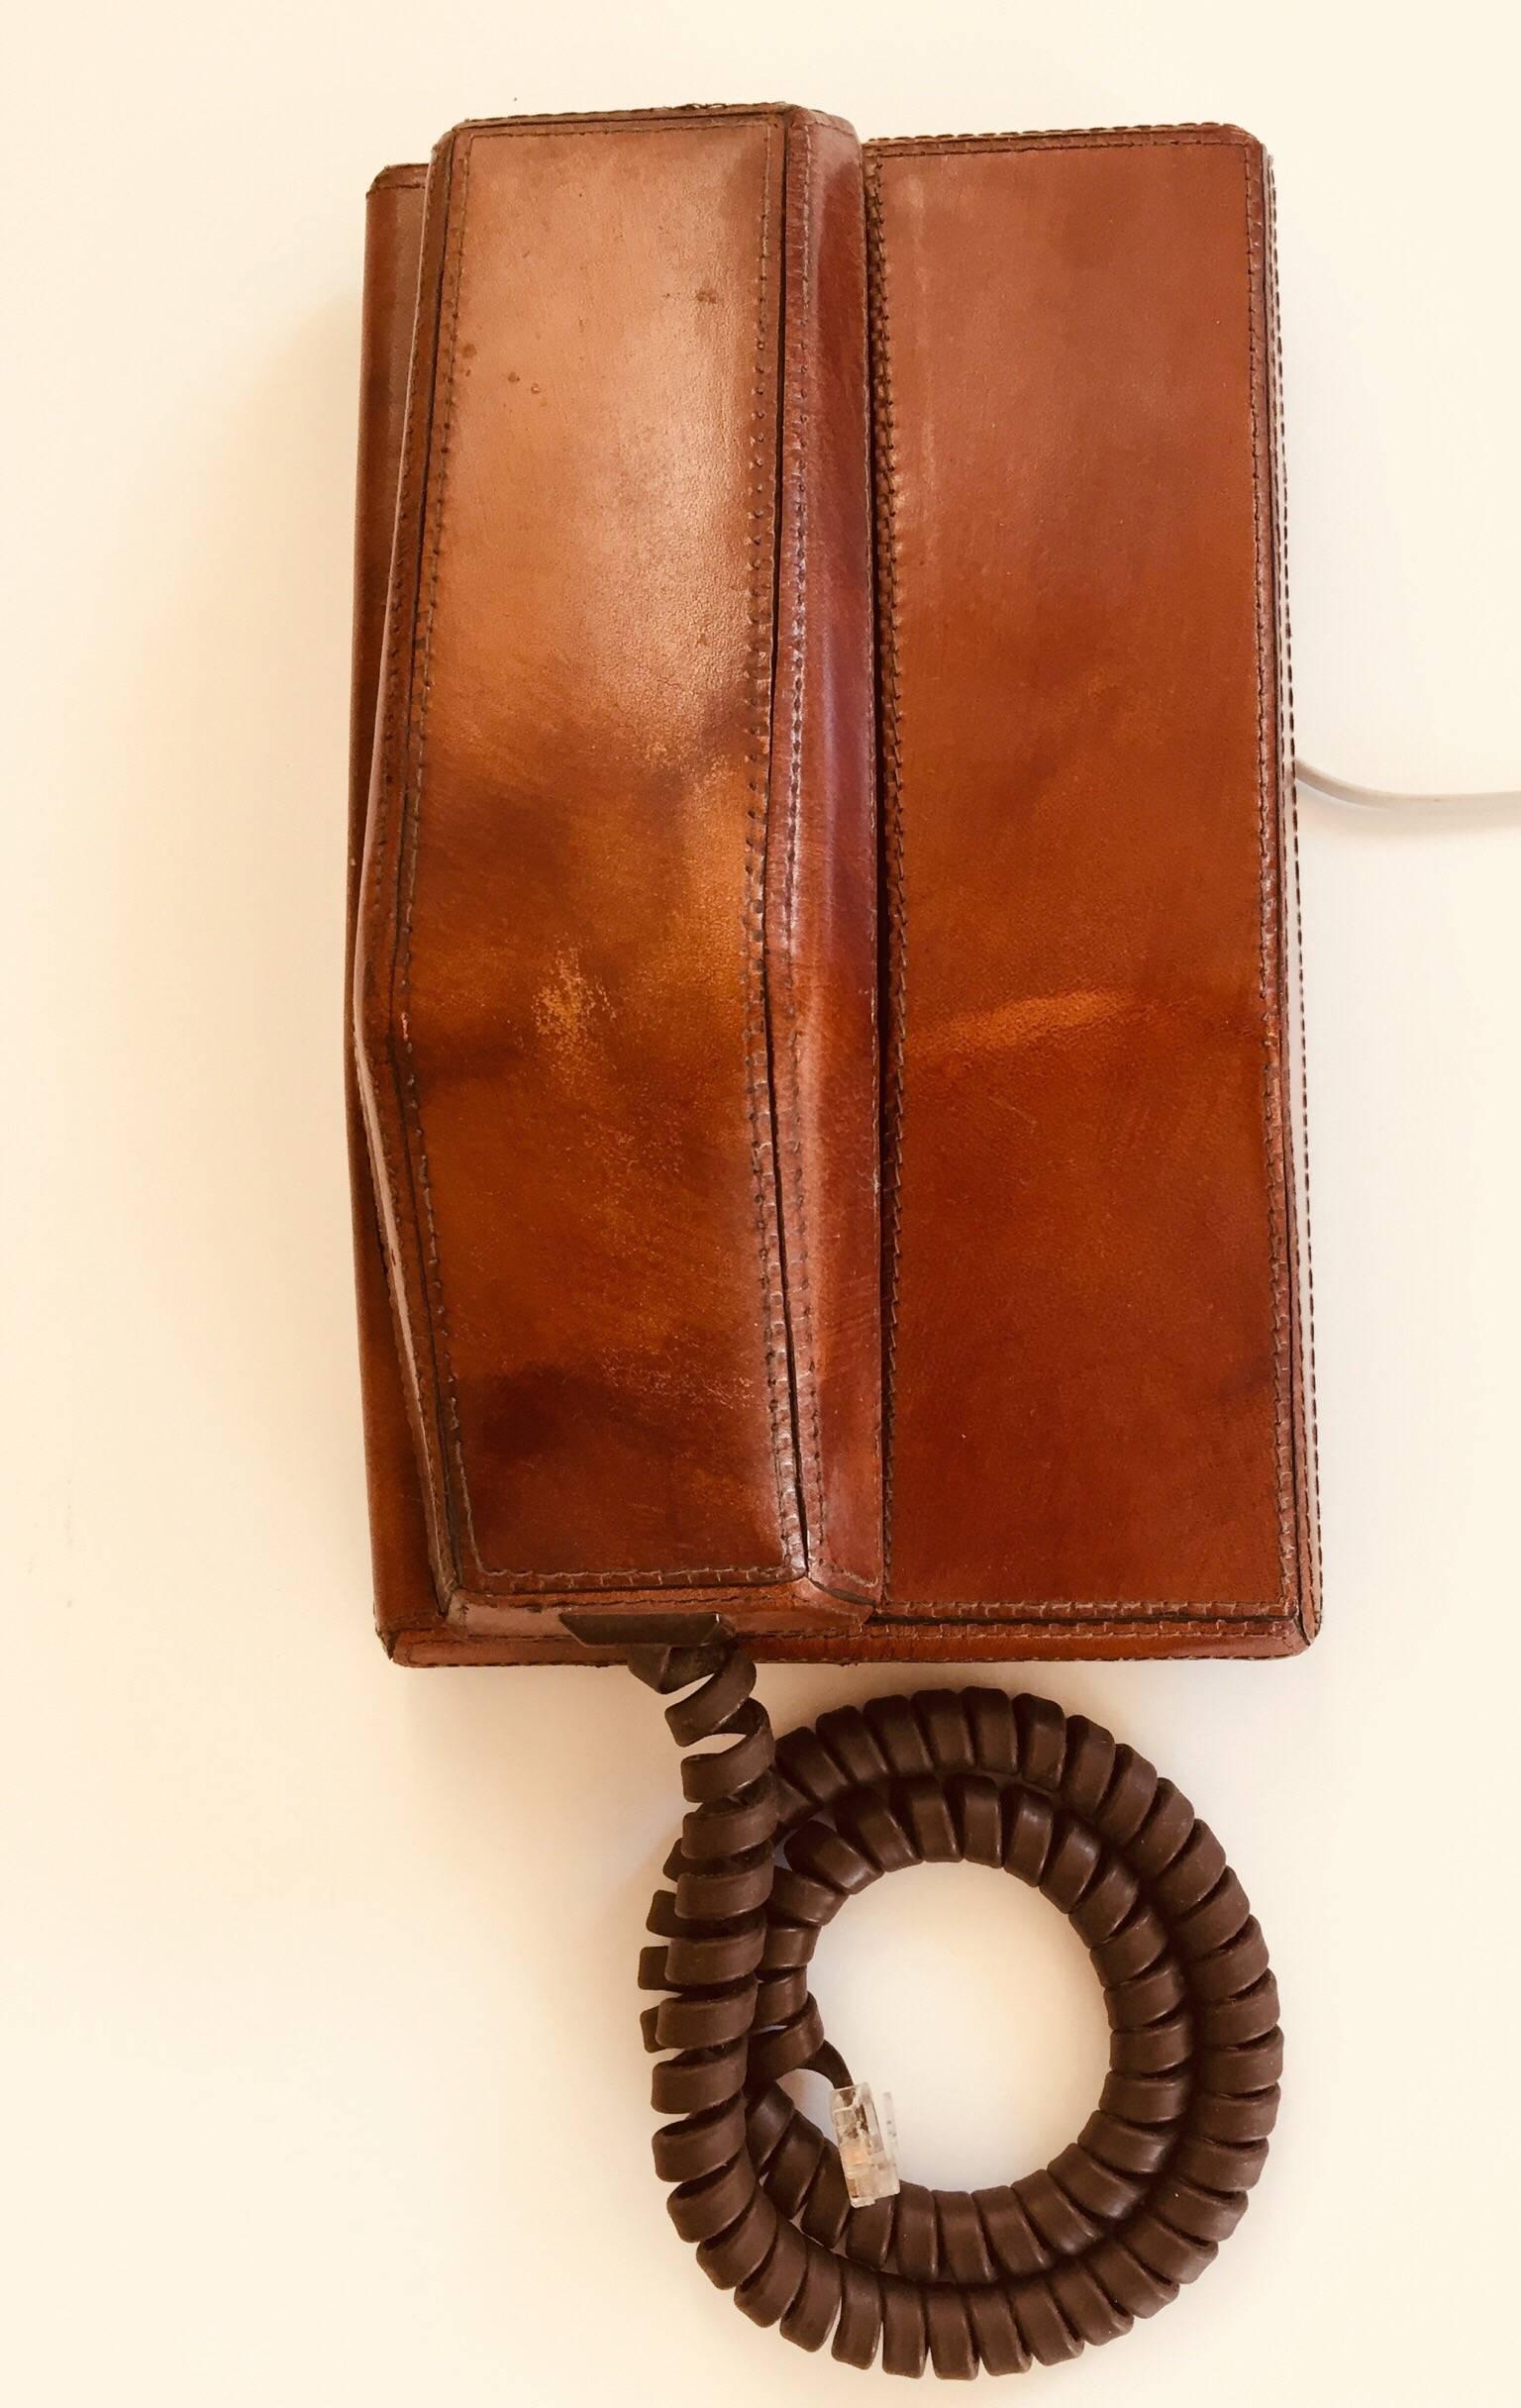 Vintage Northern Telecom Contempra telephone covered in stitched brown leather.
The keypad is located on the underside of the handset.
Could be used on a desk or wall.
Great decorative vintage masculine look object.
The telephone is covered in